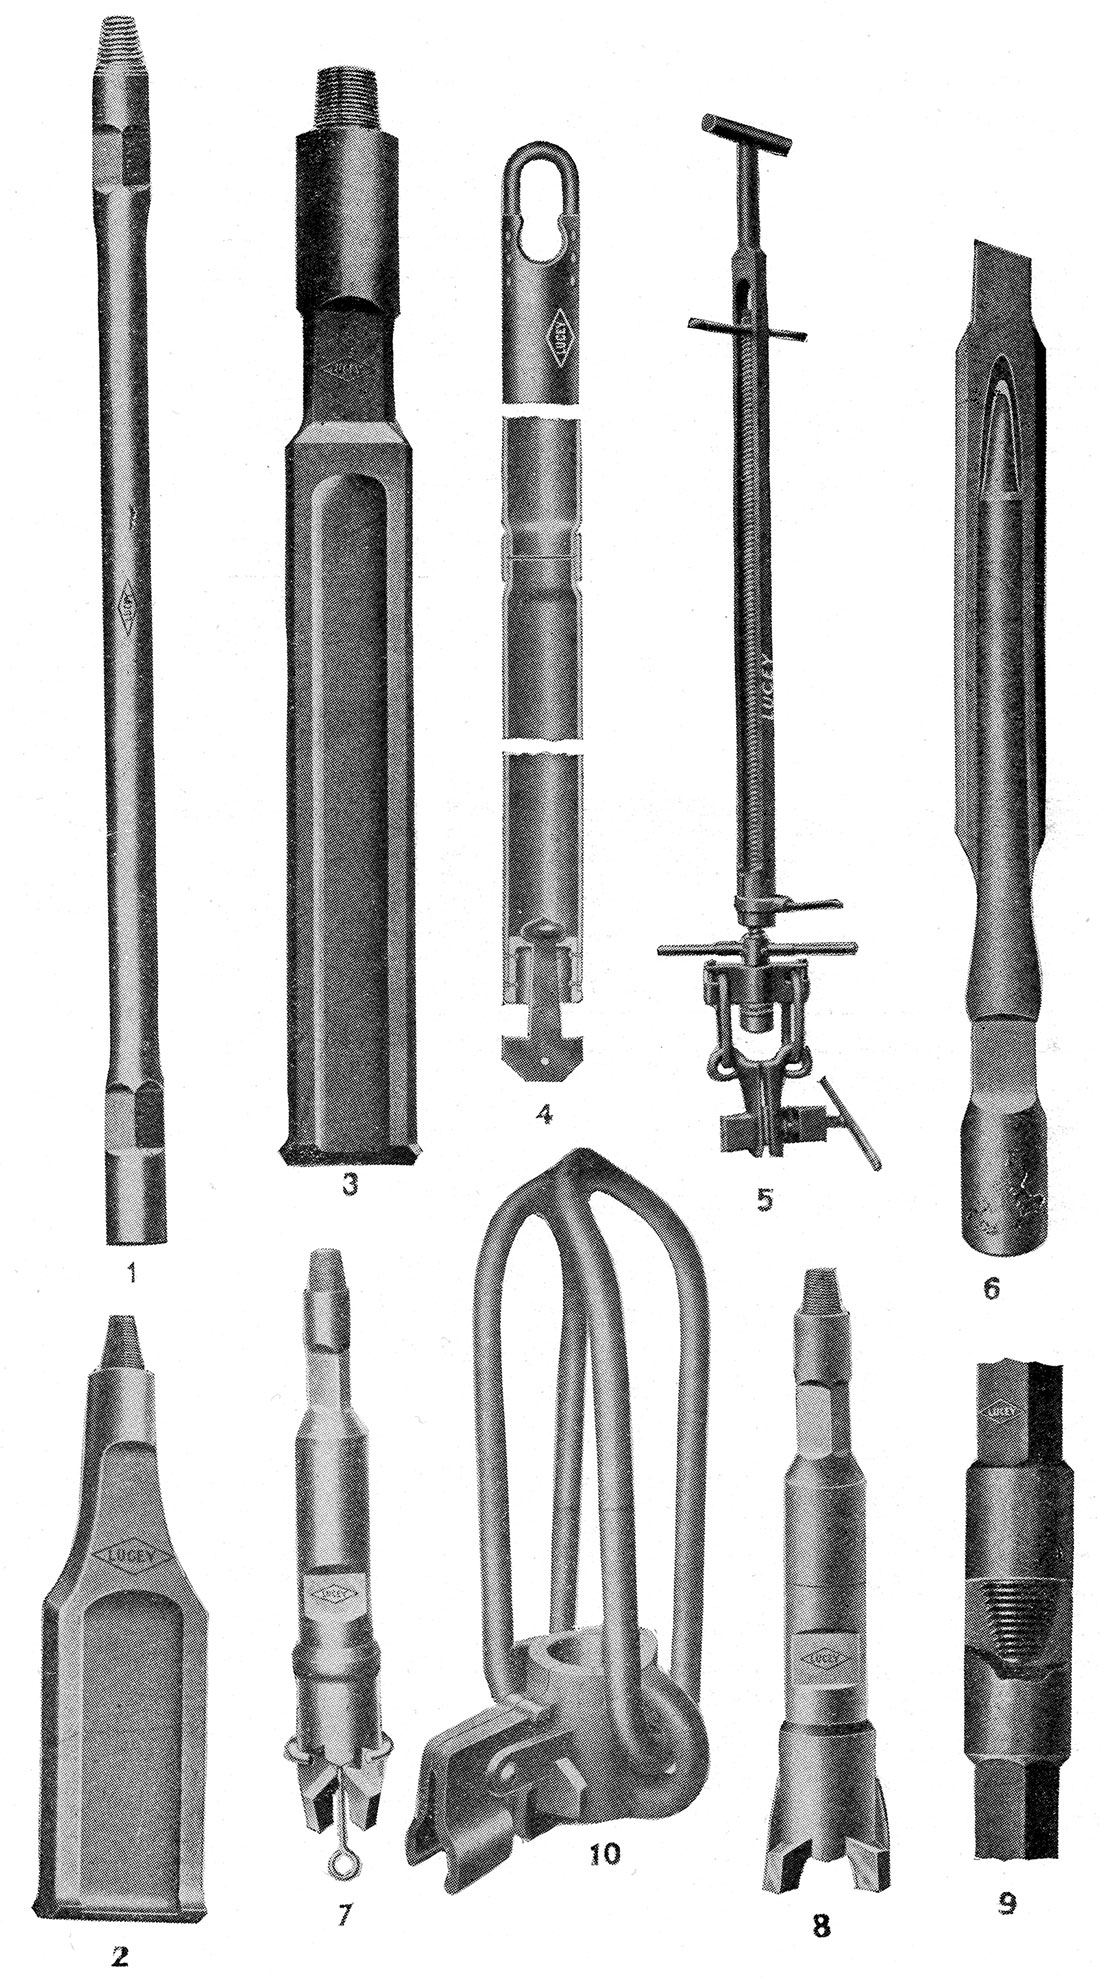 Sketch of various drilling tools.